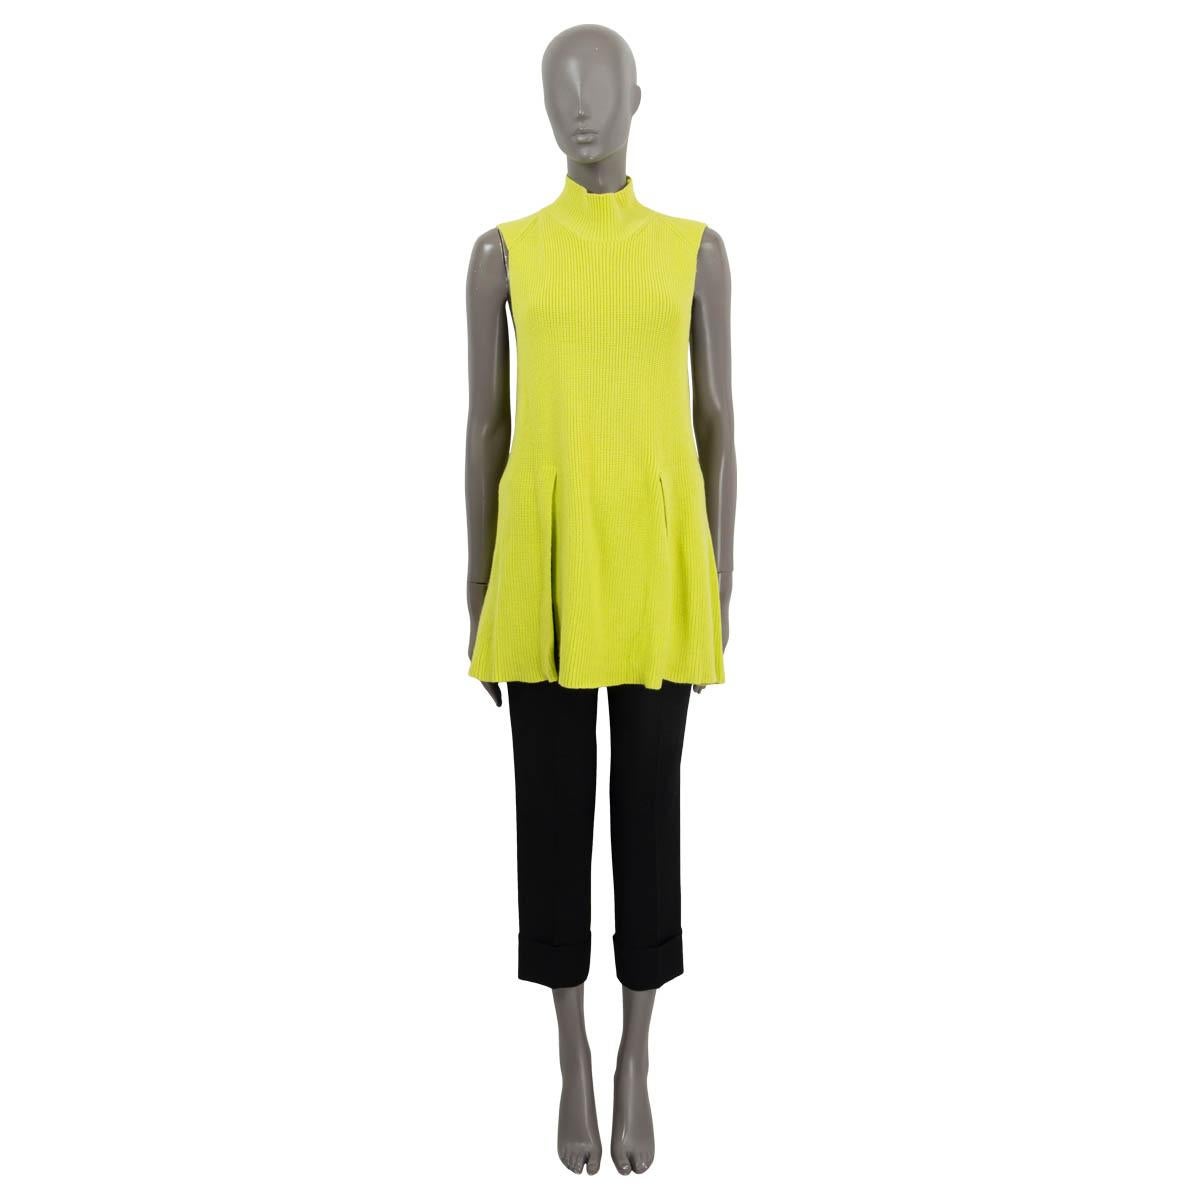 100% authentic Proenza Schouler front and back slit knit sweater in lime green wool (60%), cotton (21%) and cashmere (19%). Features a high neck. Unlined. Has been worn and is in excellent condition.

Measurements
Tag Size	L
Size	L
Bust	86cm